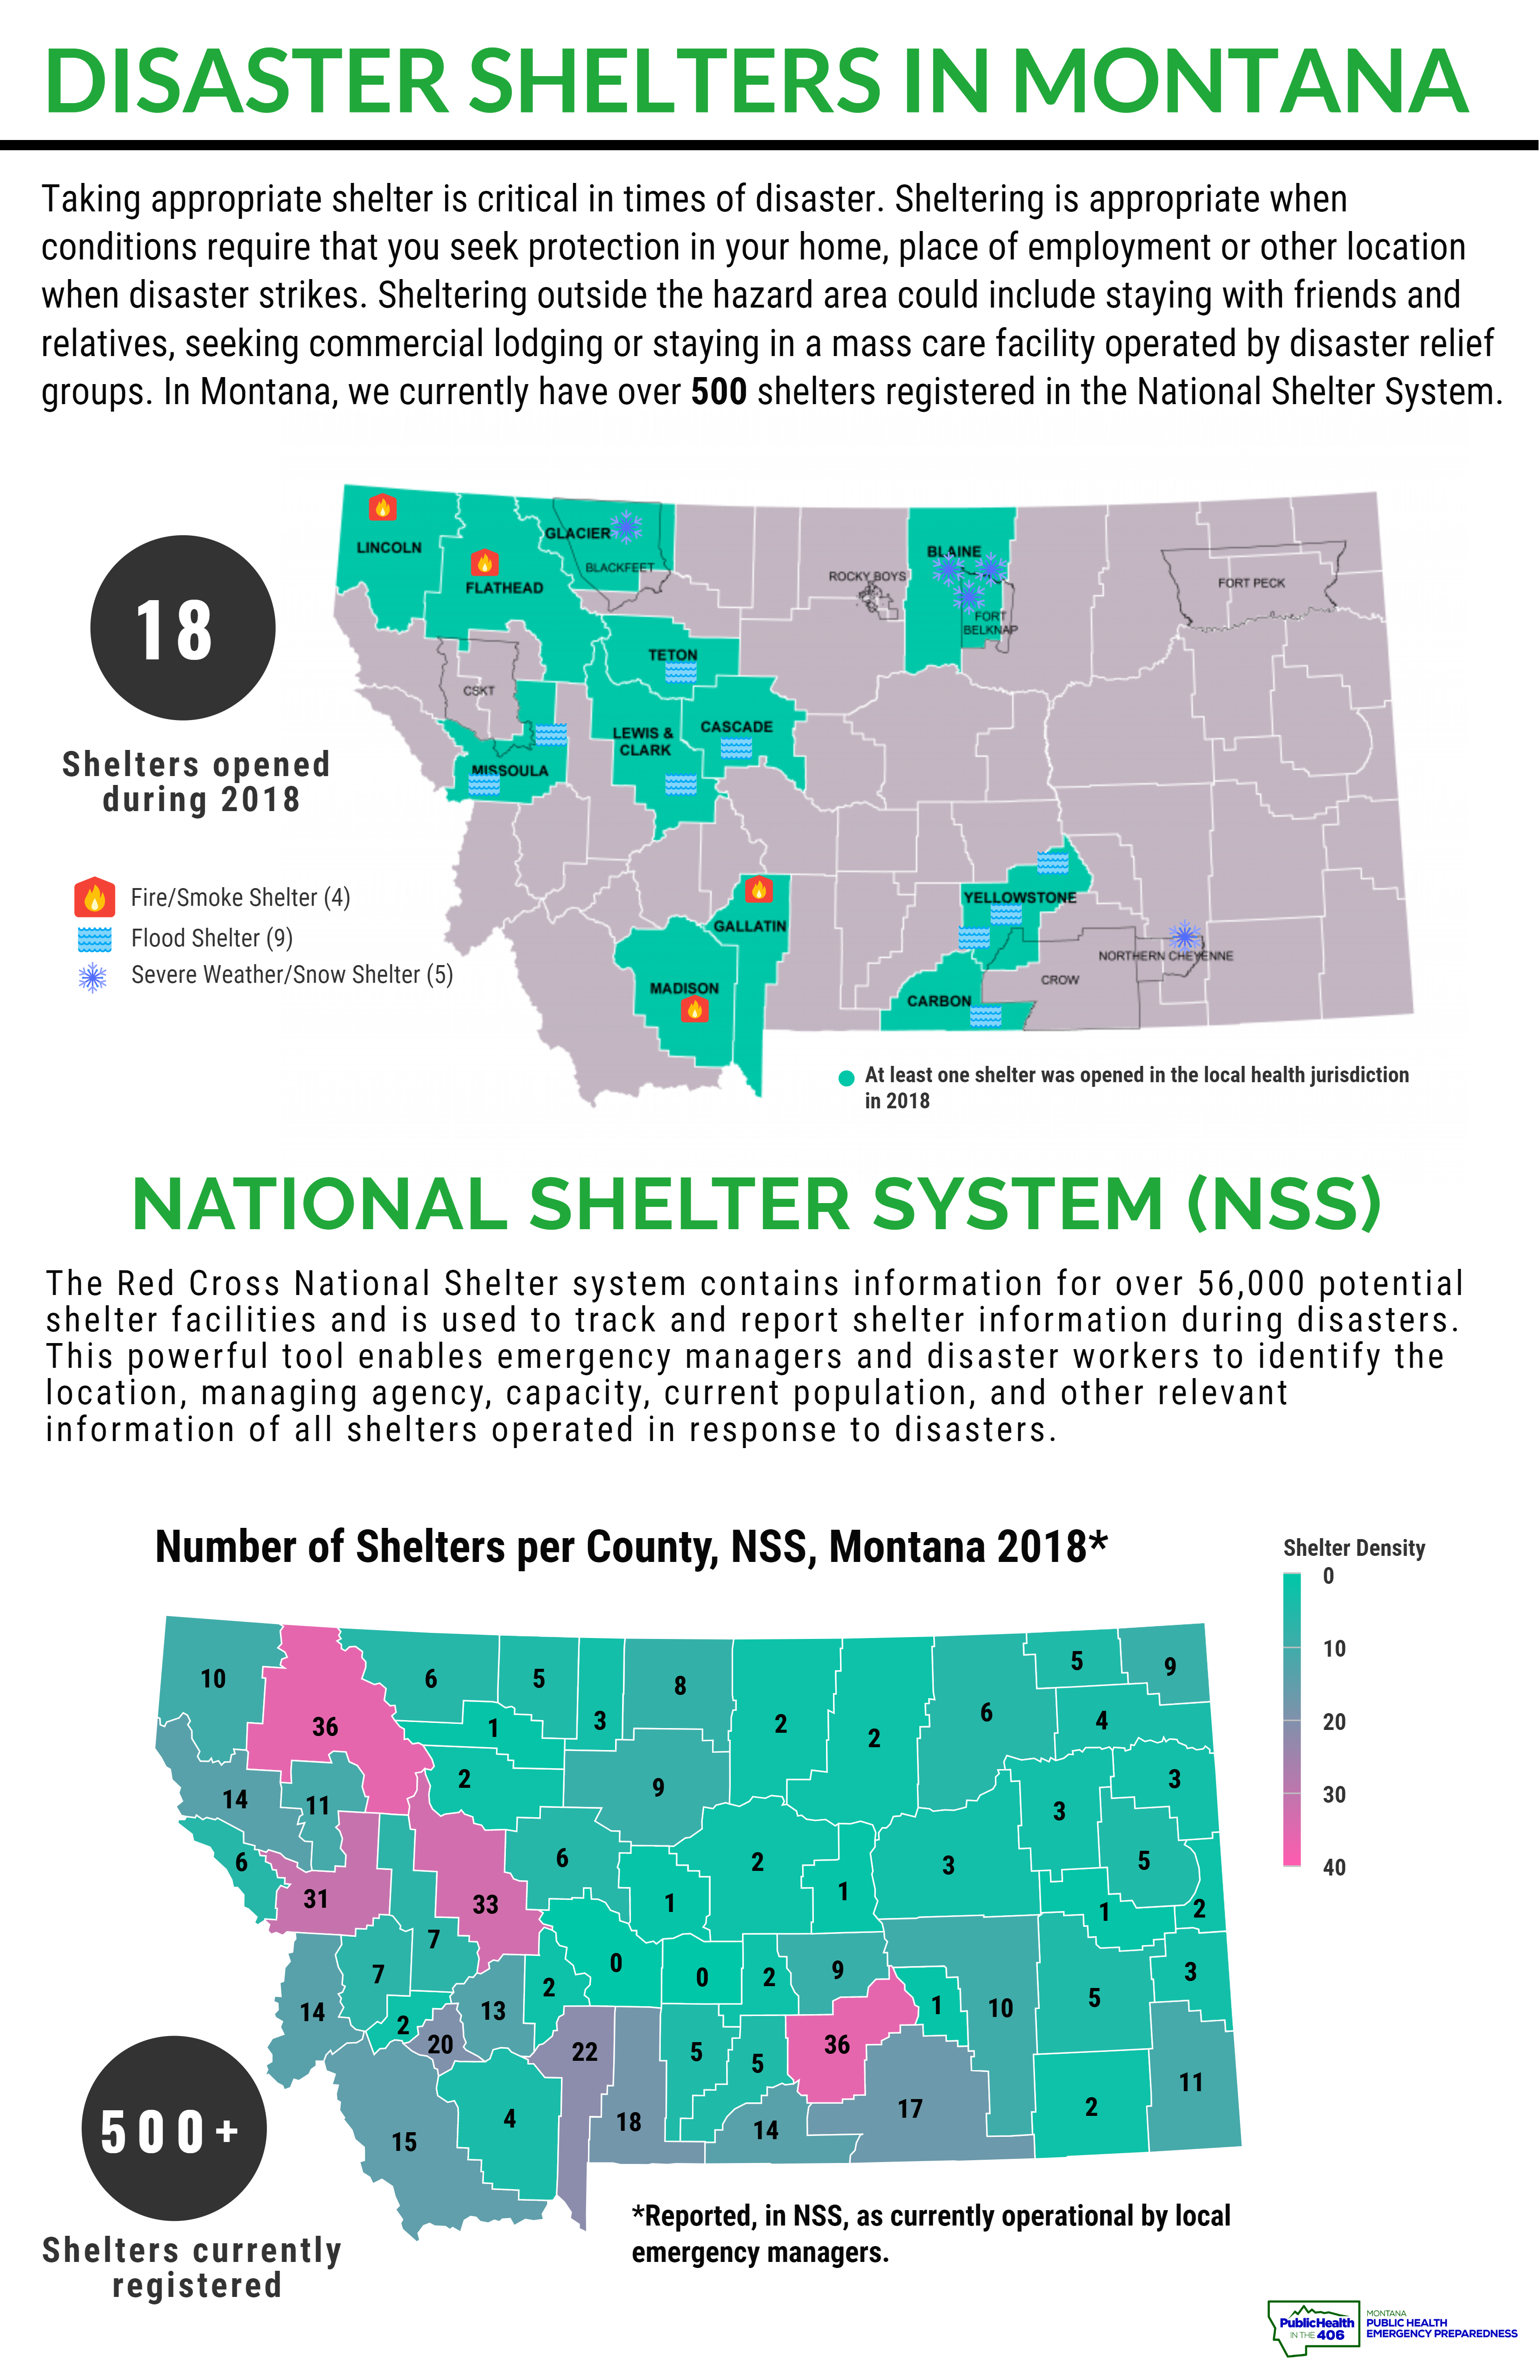 Disaster Shelters in Montana